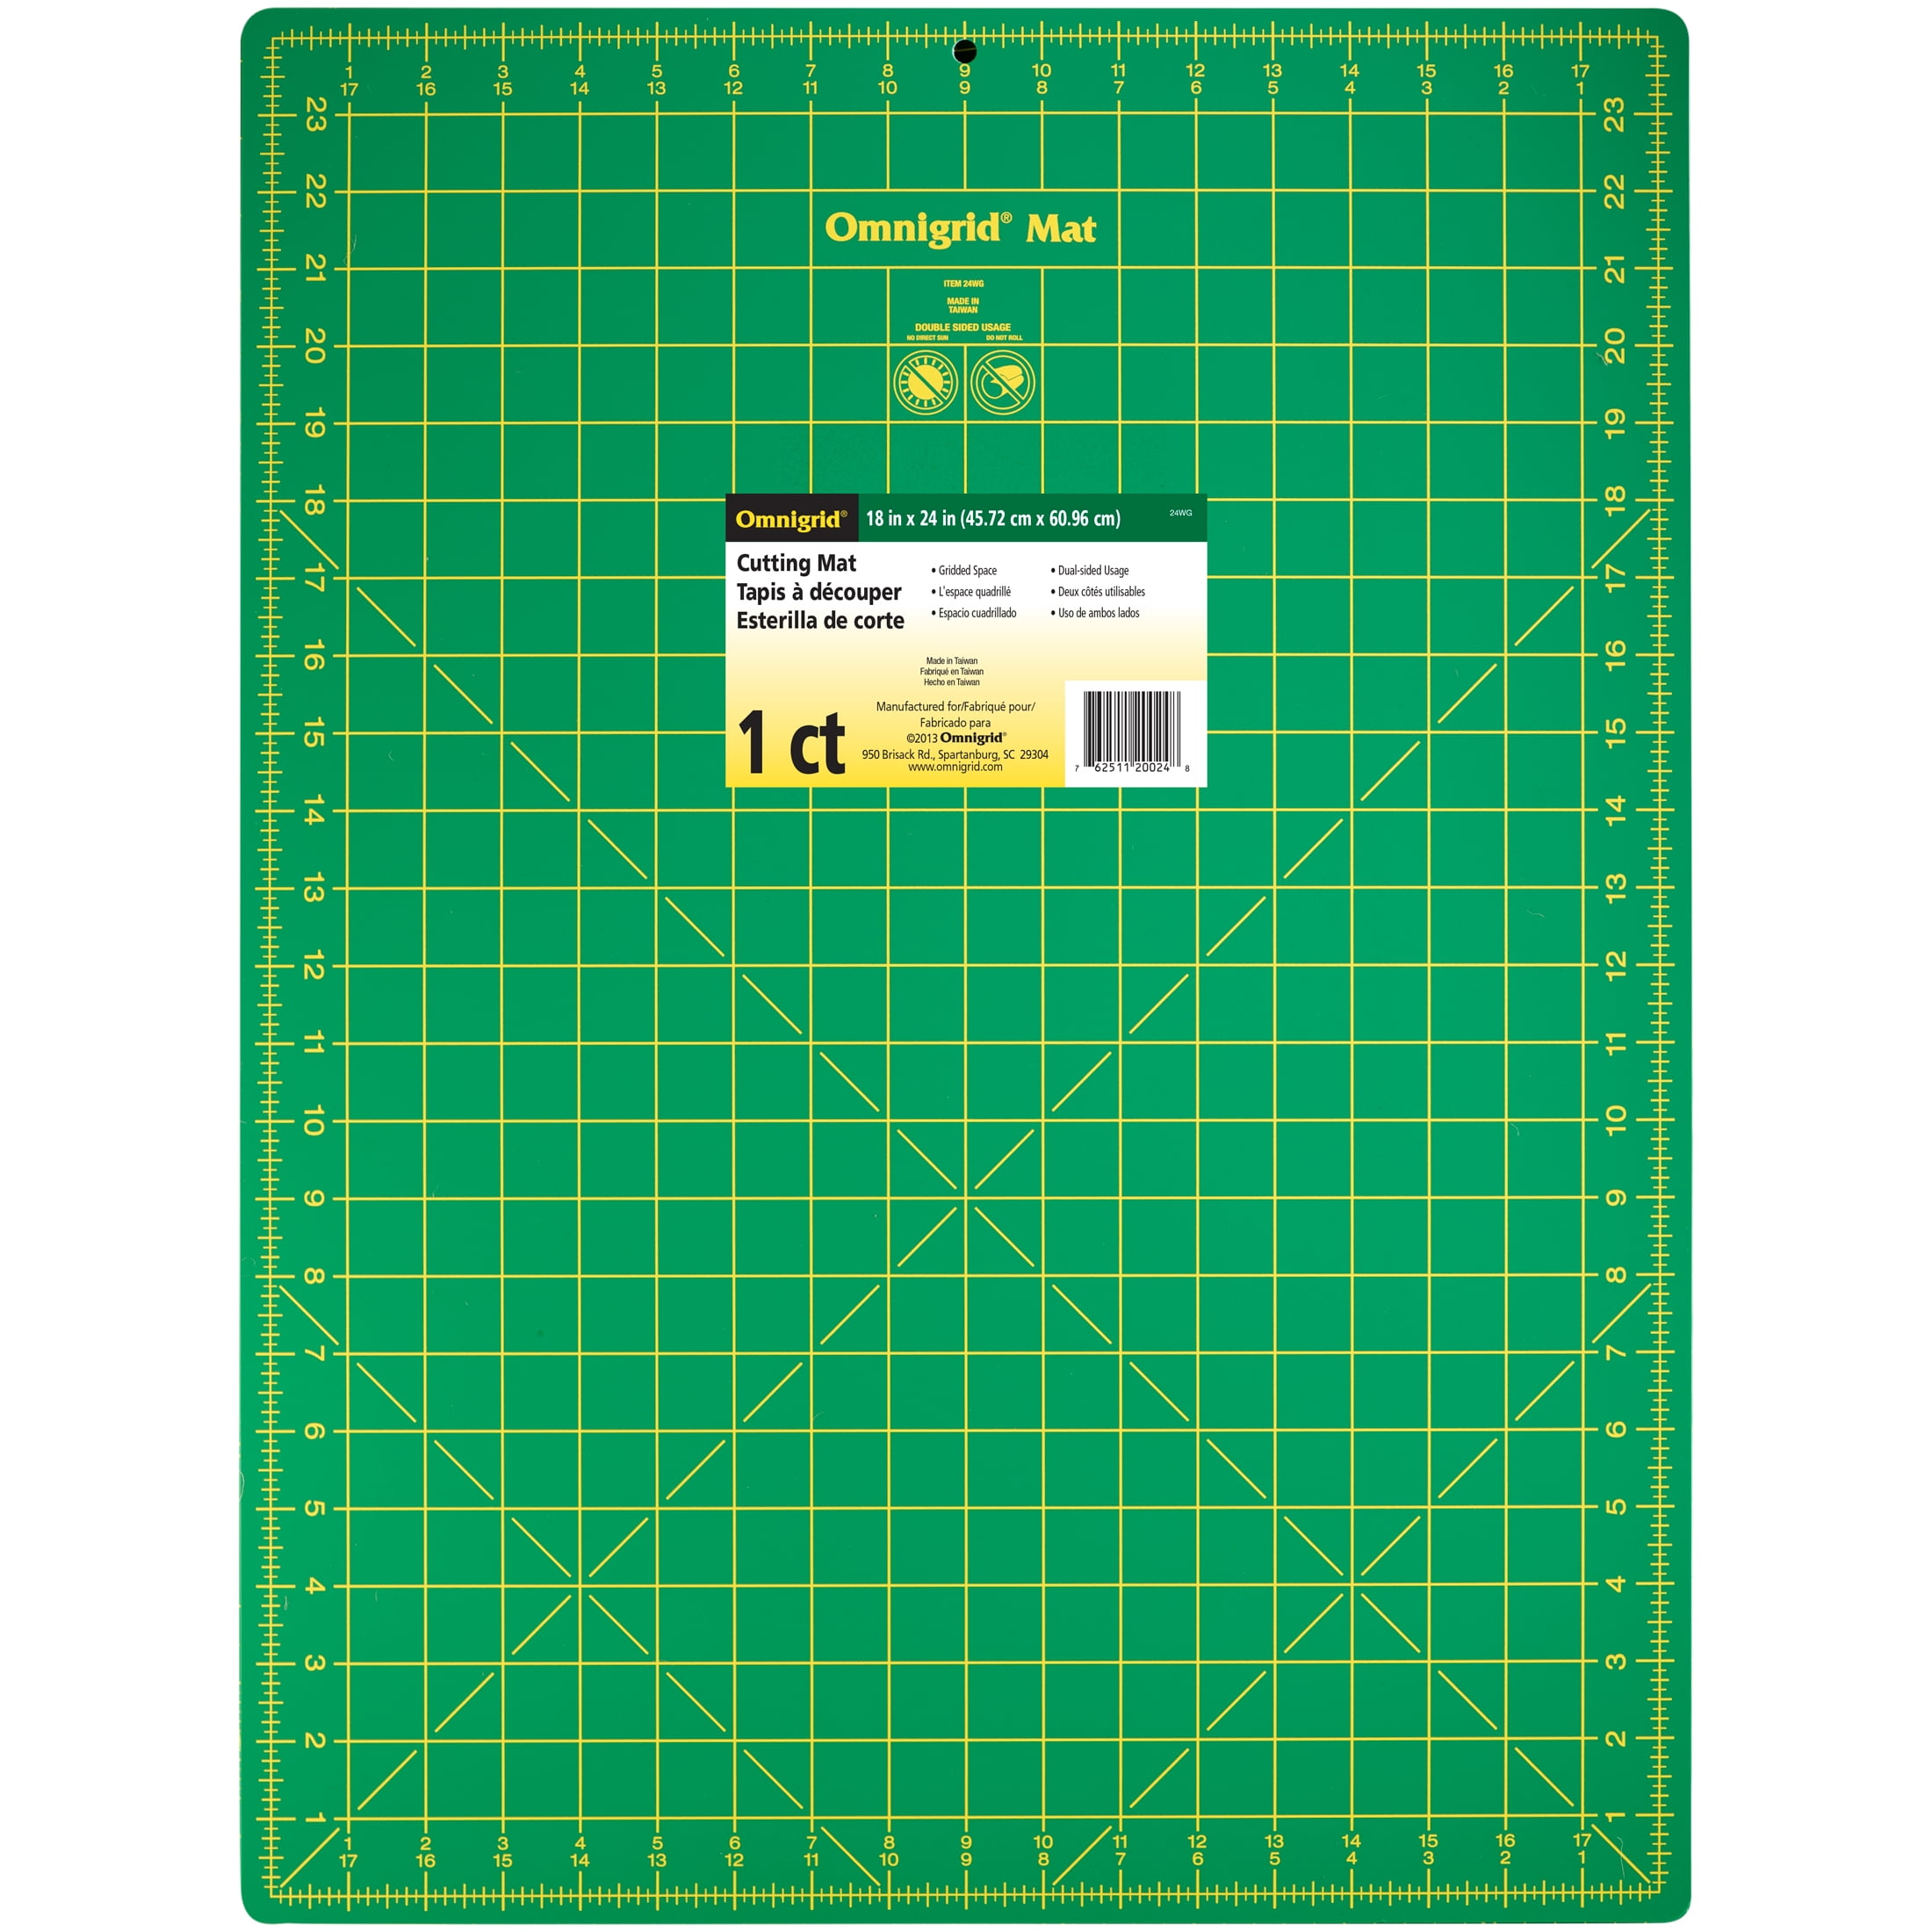 ARTIST'S BEST Green Cutting Mat, 18  x 24 (45.7 x 61 cm), Self-Healing  & Reusable, Pre-Marked Grid Lines in Inches & Millimeters